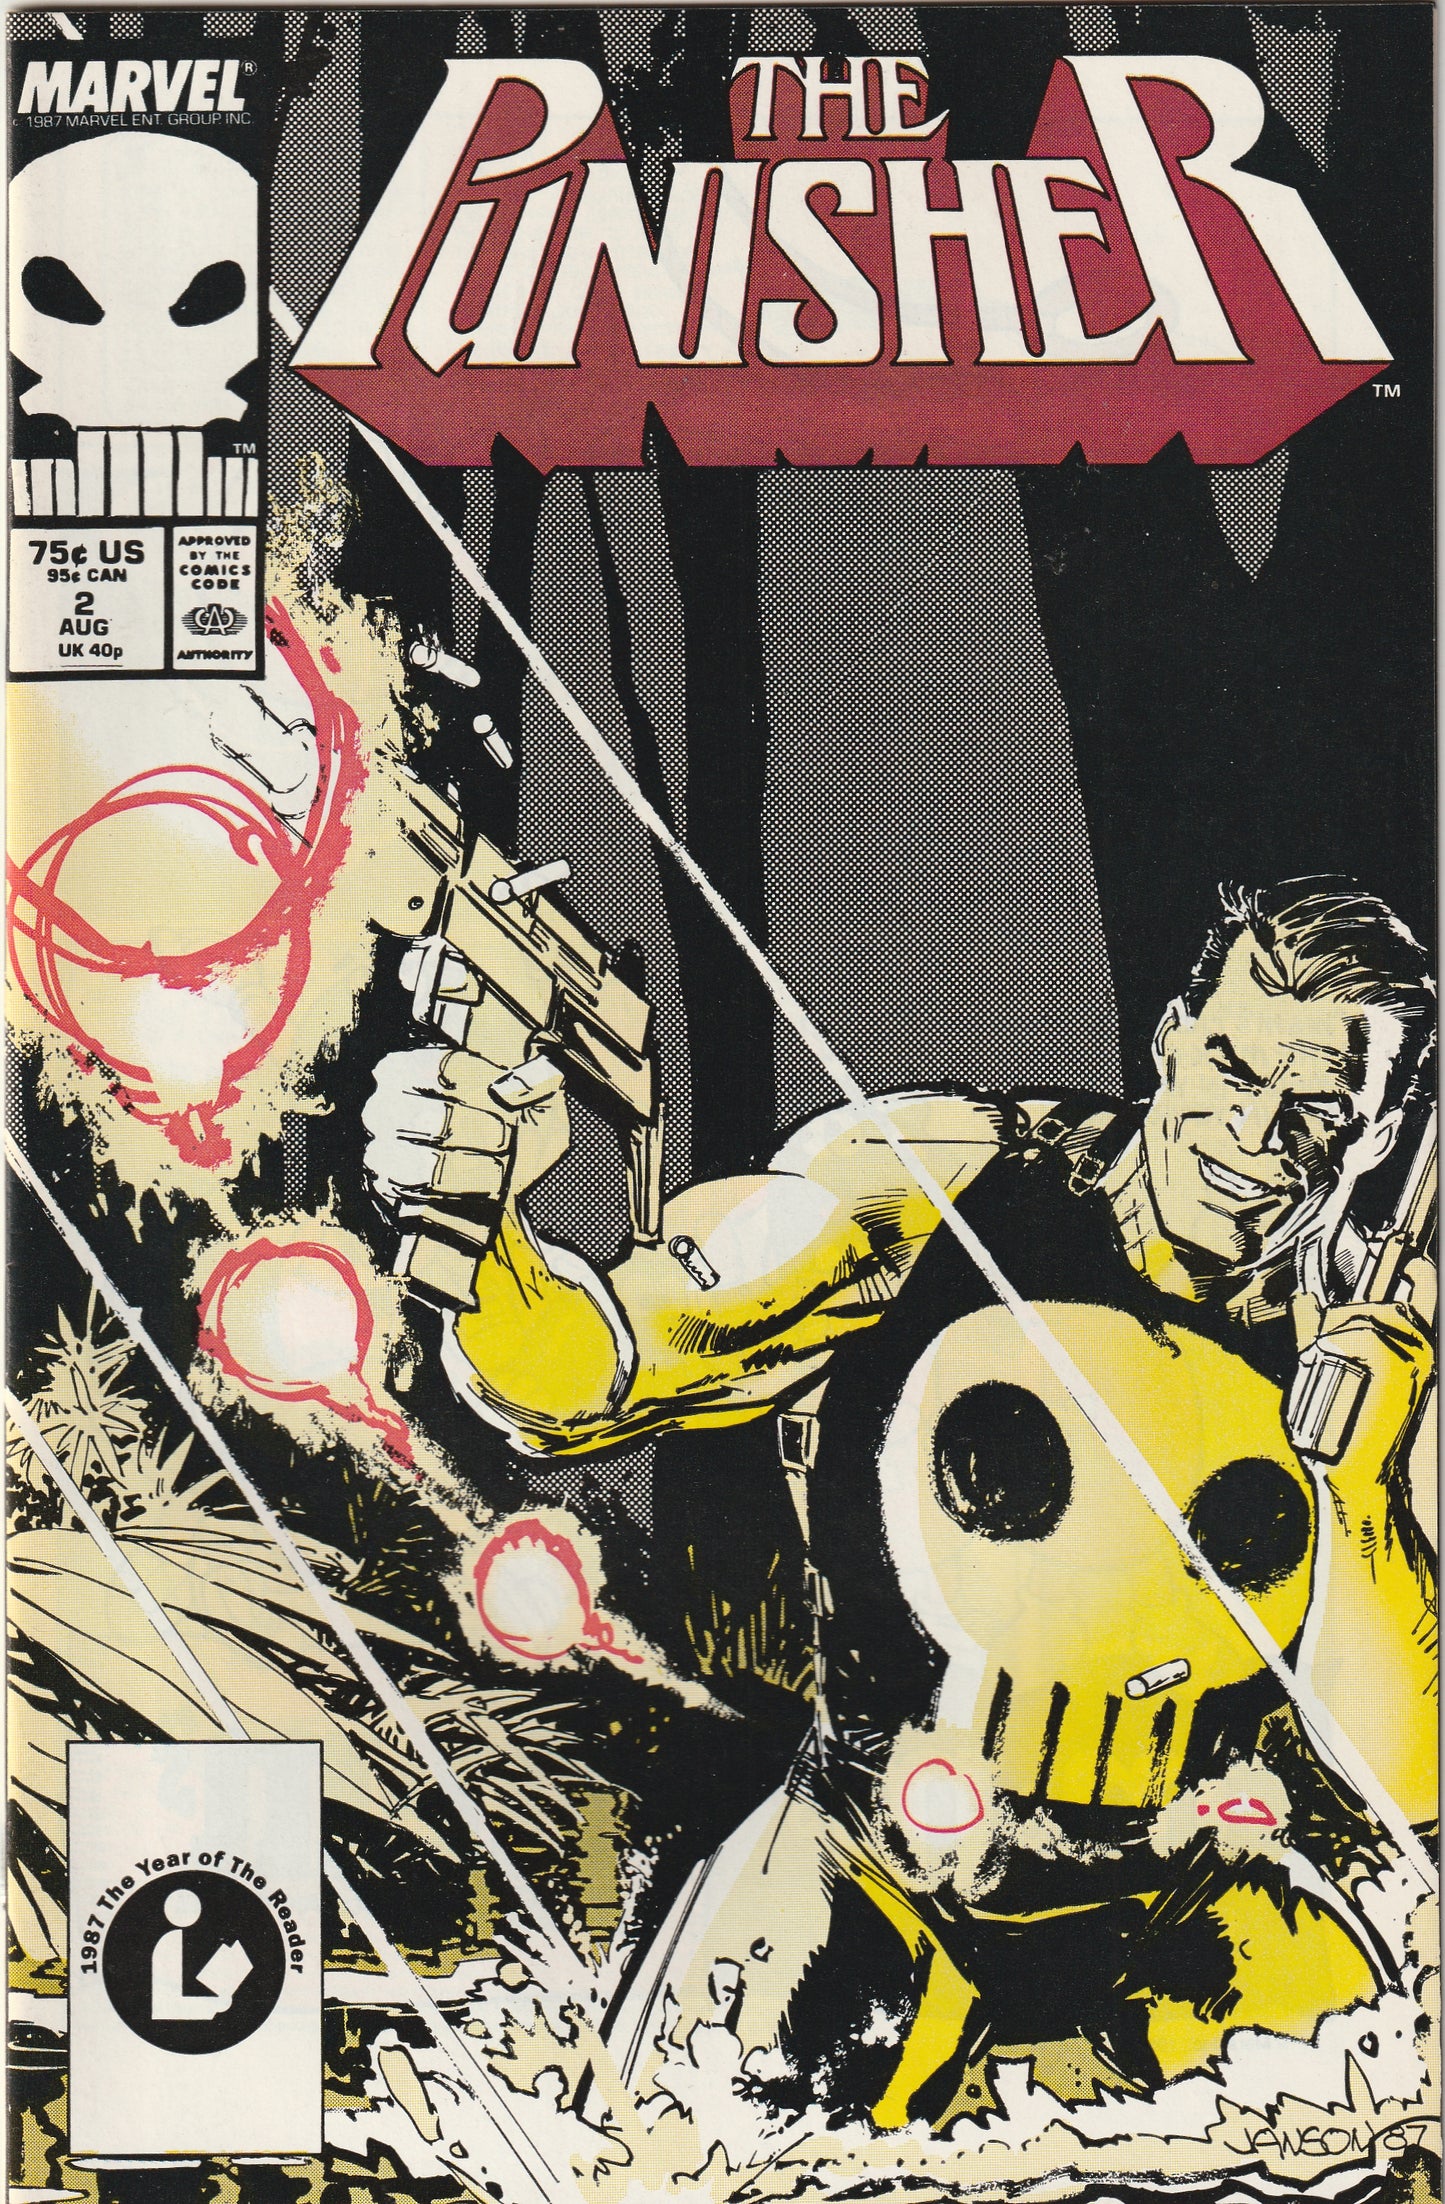 The Punisher #2 (1987)